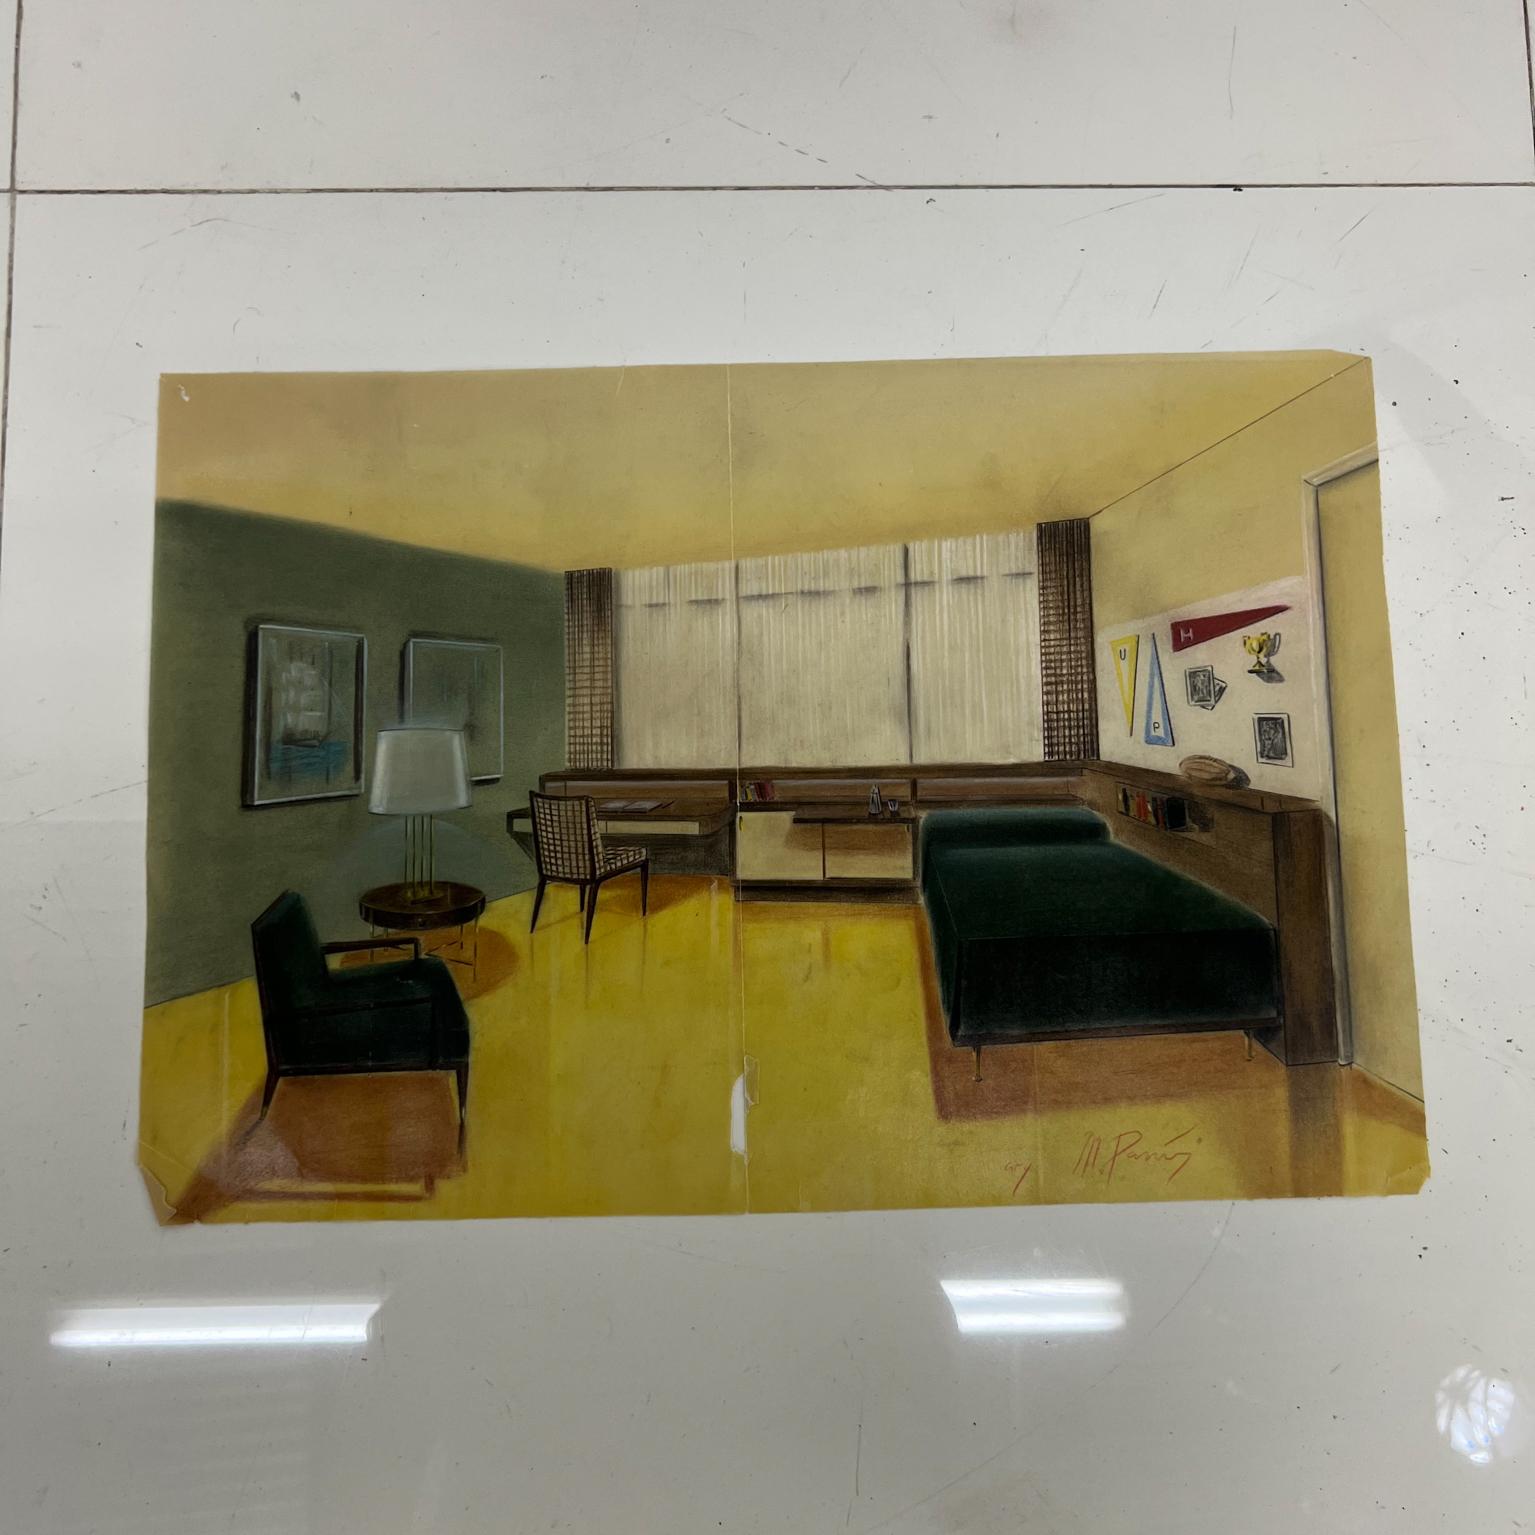 Mid 20th century interior design sketch mario pani Mexico City.
Measures: 18.5 x 12.75.
Signed art
Original vintage condition art unrestored preowned drawing
See images provided please.
 